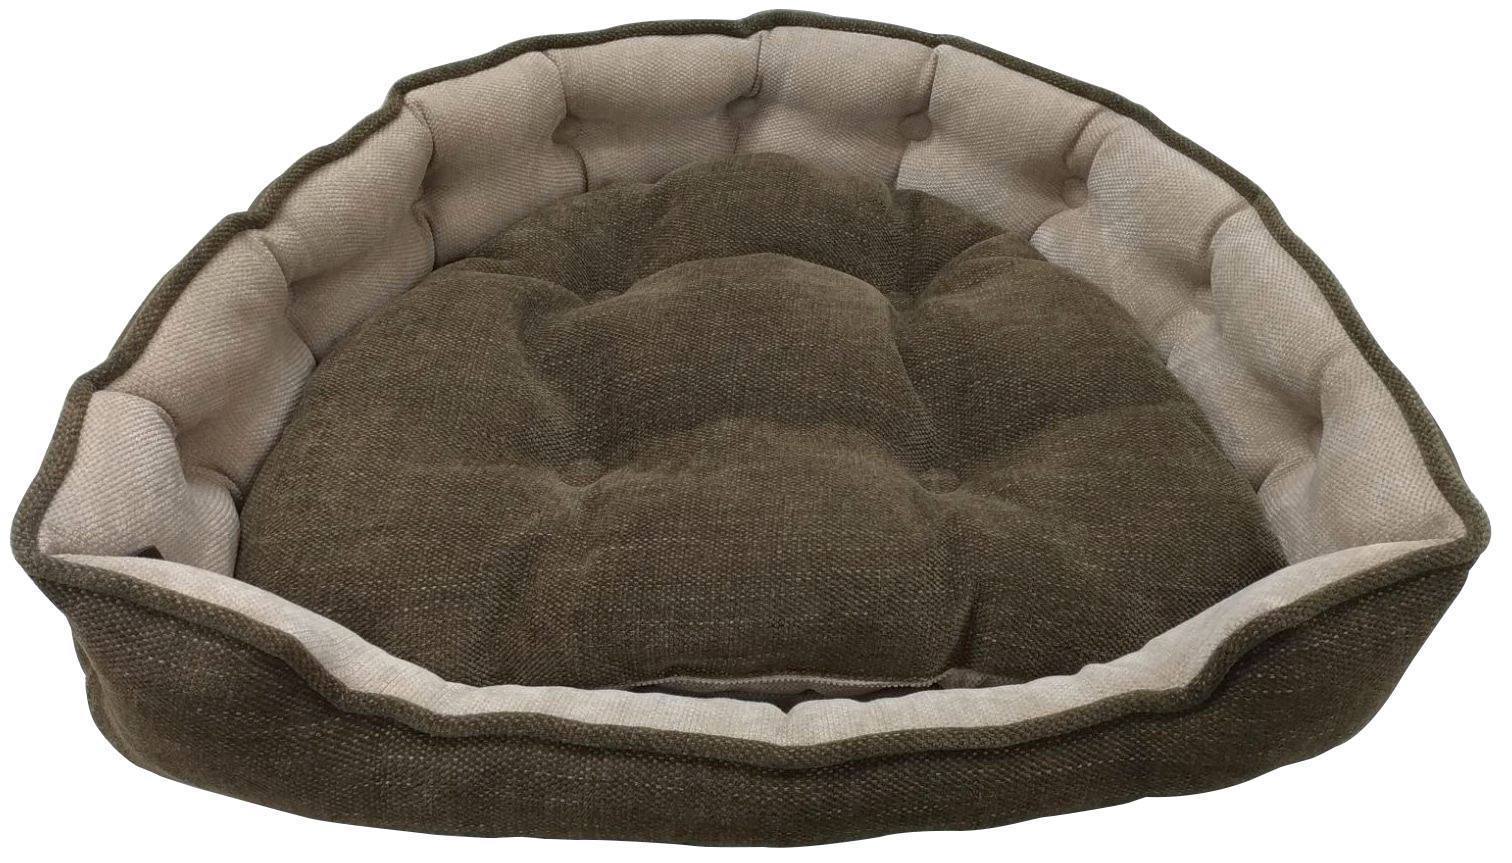 One for Pets - Adela Snuggle Bed - Coffee - 21" x 18" x 5"(S) - PetProject.HK